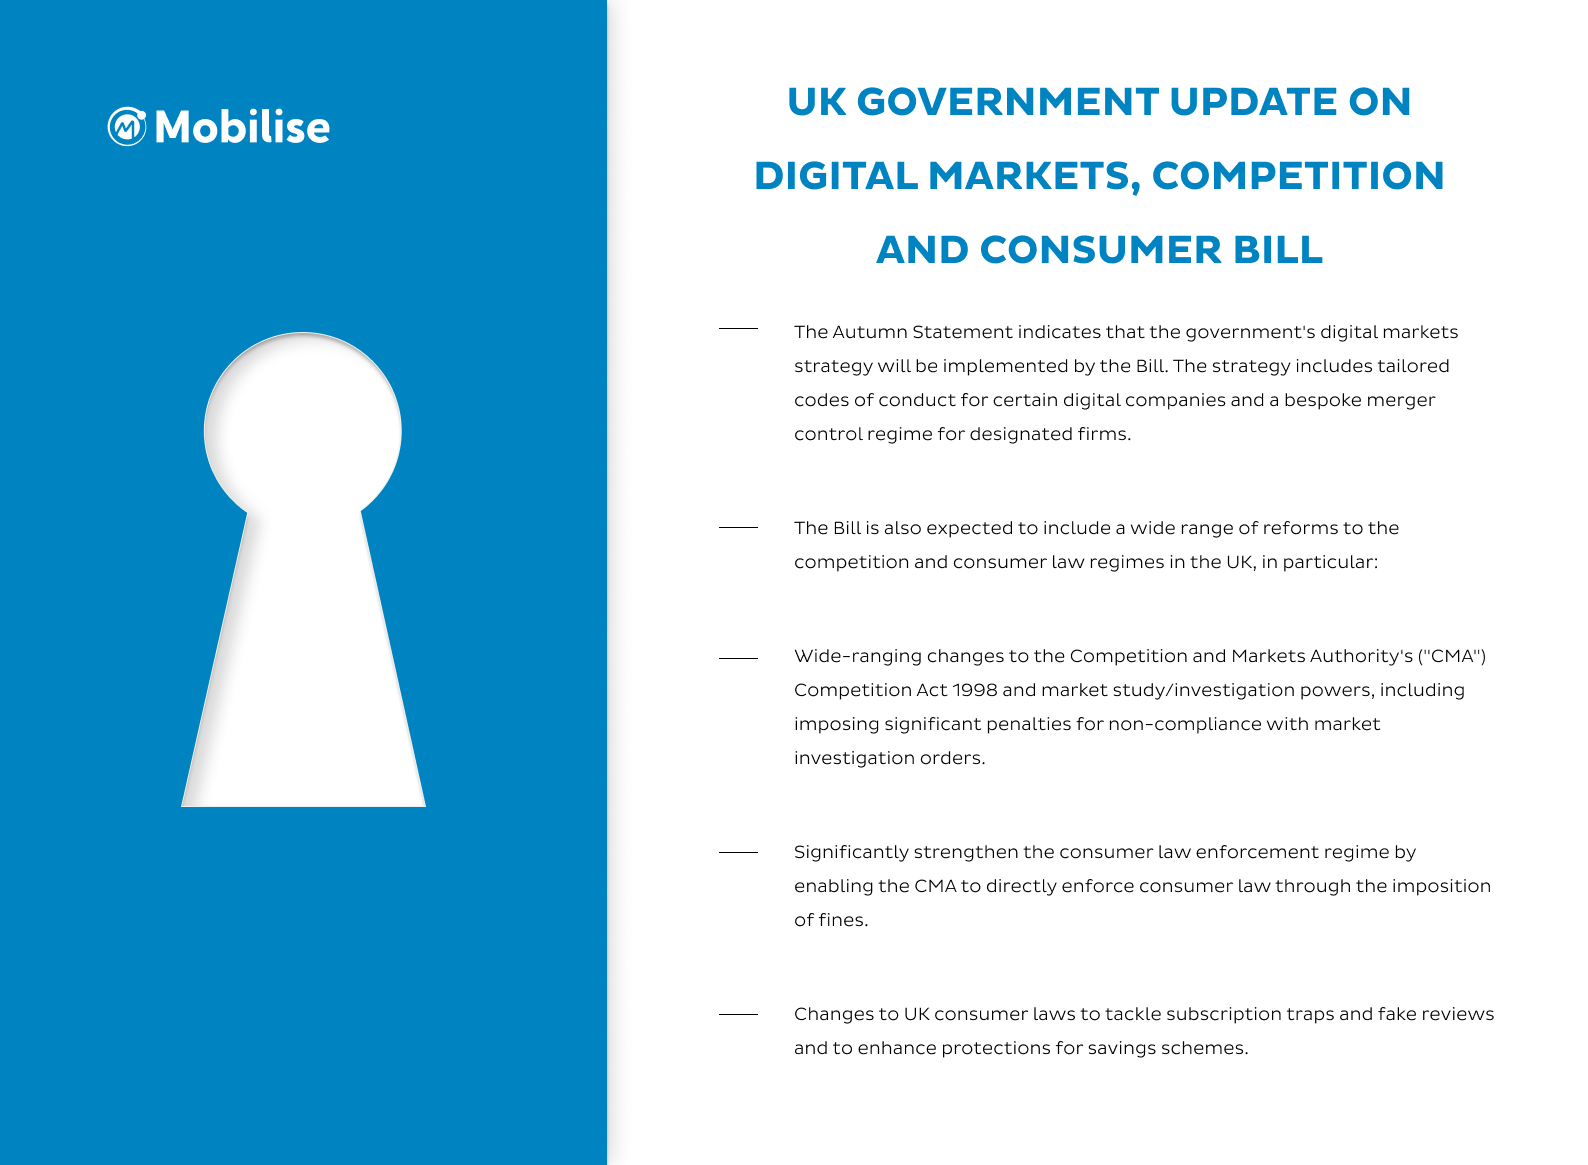 Key takeaways from the UK Government Update on Digital Markets, Competition and Consumer Bill